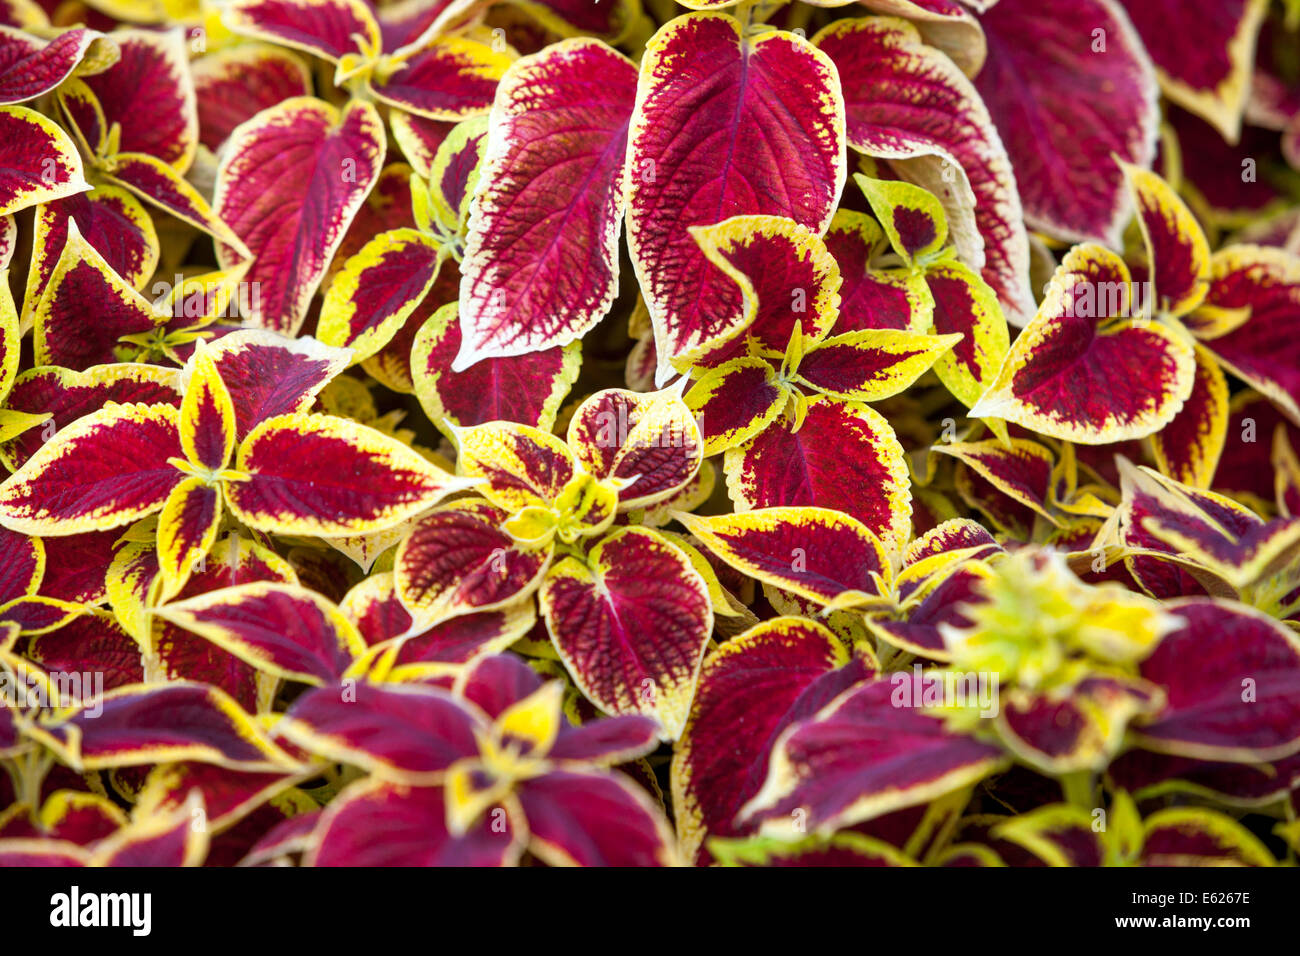 Colorful flower bed of annual flowers, Coleus 'Wizard scarlet' Stock Photo